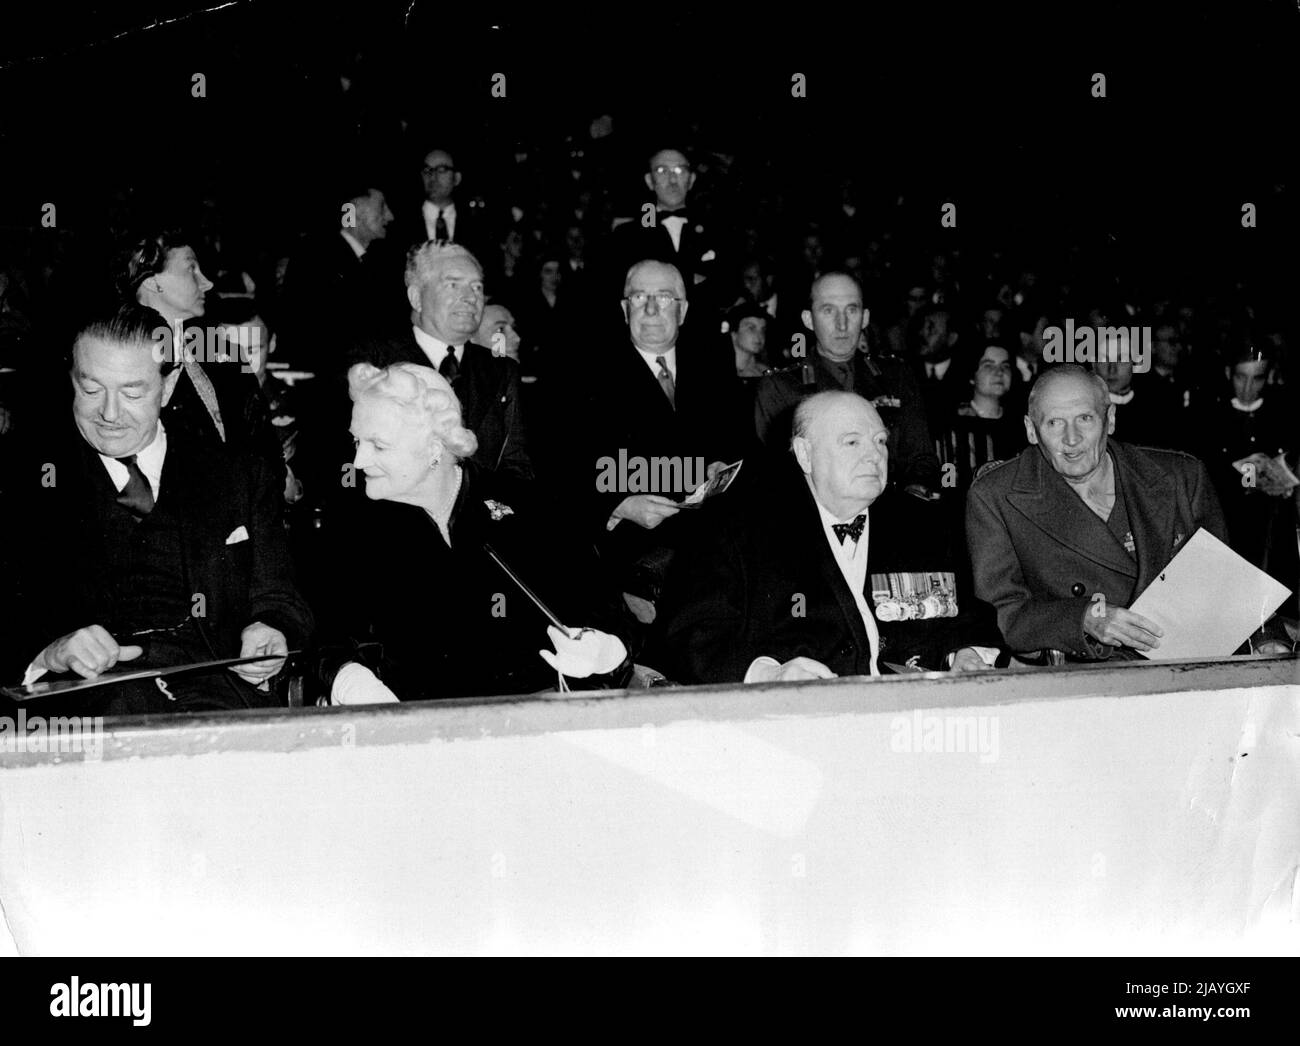 Premier With The Desert Heroes: Distinguished figures at the El Alamein Reunion at the Empress hall, Earls court, London, tonight (Friday) - left to right: Earl Alexander of Tunis; Mrs. Churchill; Mr. Winston Churchill and Viscount Montgomery. October 24, 1952. (Photo by Reuterphoto) Stock Photo